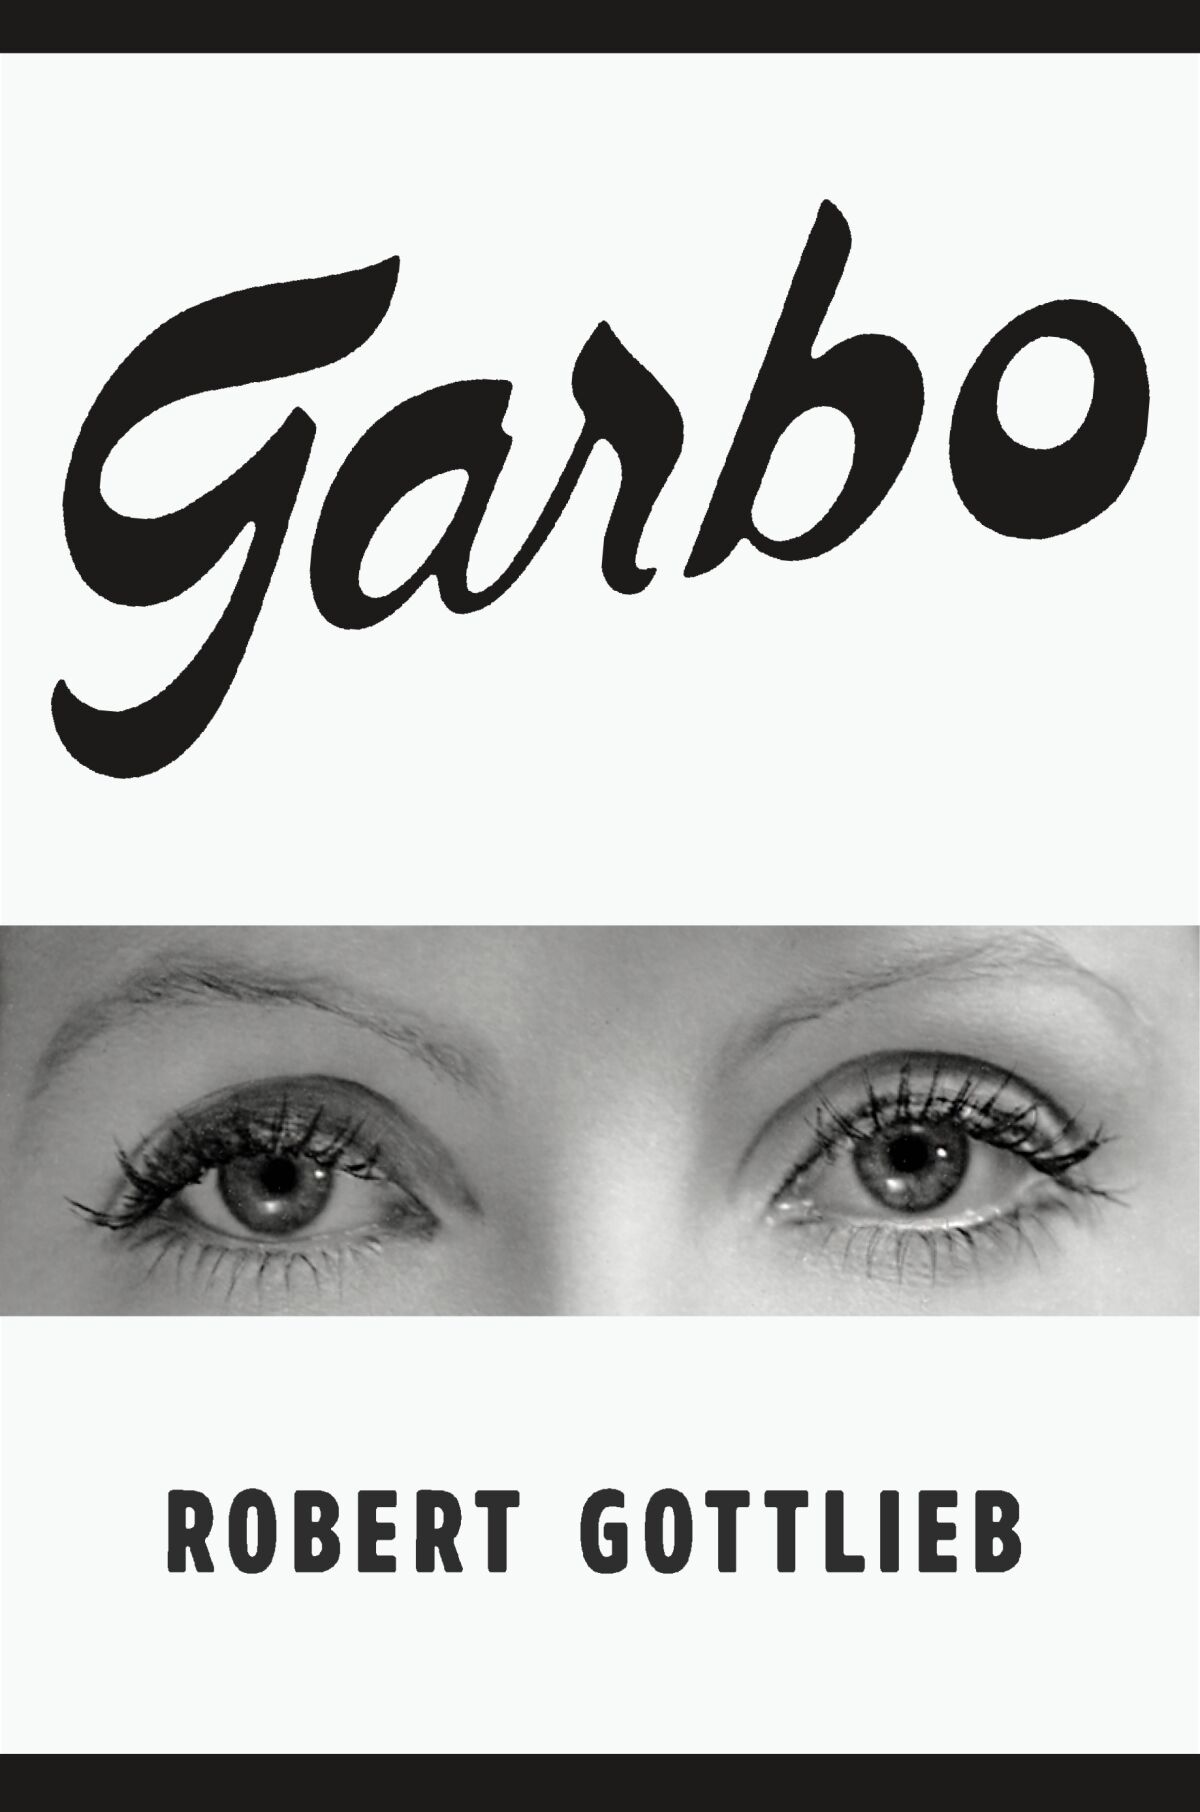 This cover image released by Farrar, Straus and Giroux shows "Garbo" by Robert Gottlieb. (Farrar, Straus and Giroux via AP)